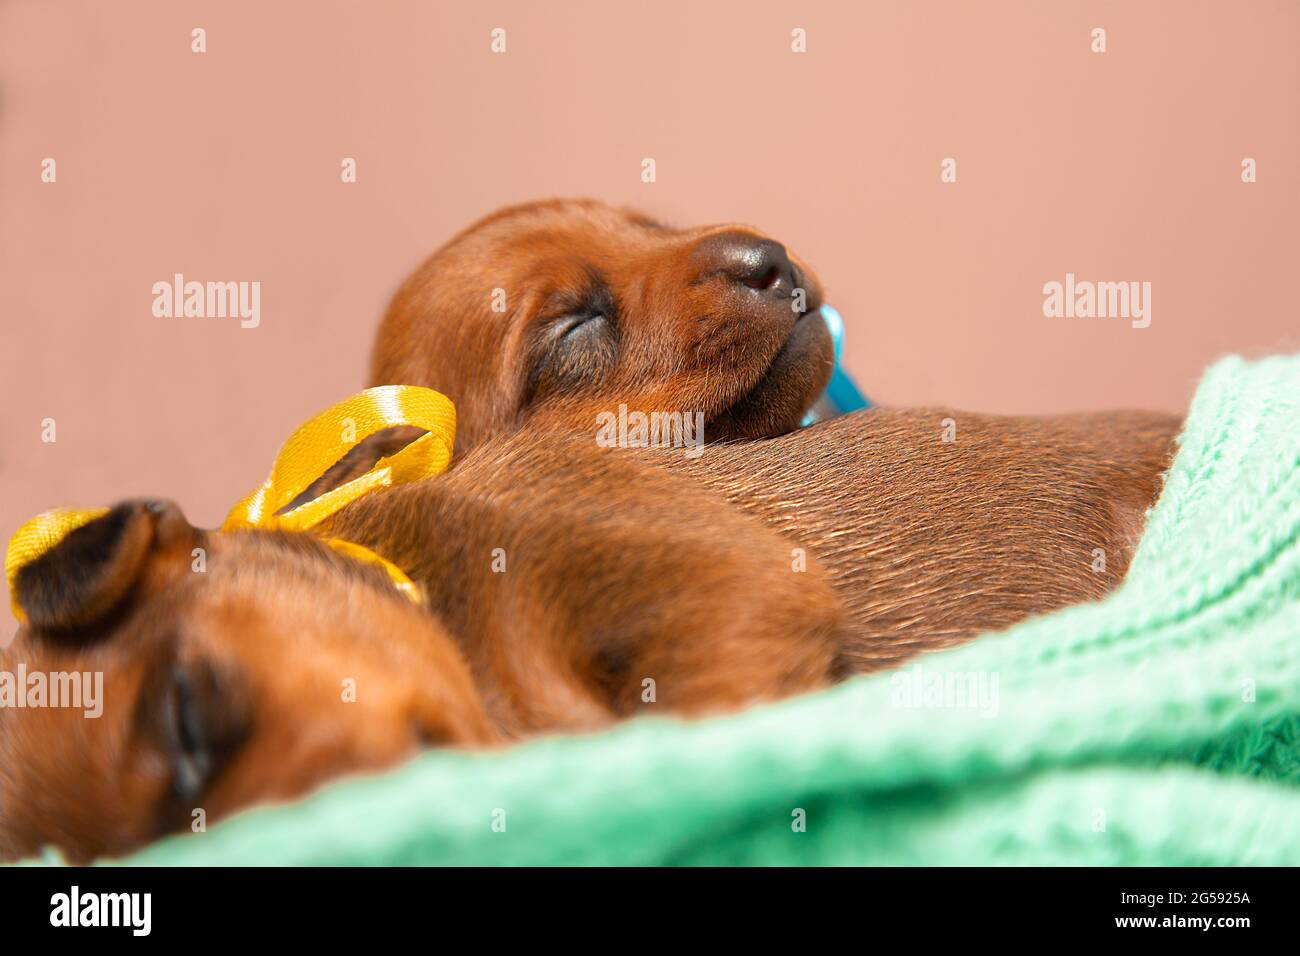 Two small newborn puppies lie on a warm knitted blanket. Pygmy pinscher puppies are sleeping. Stock Photo